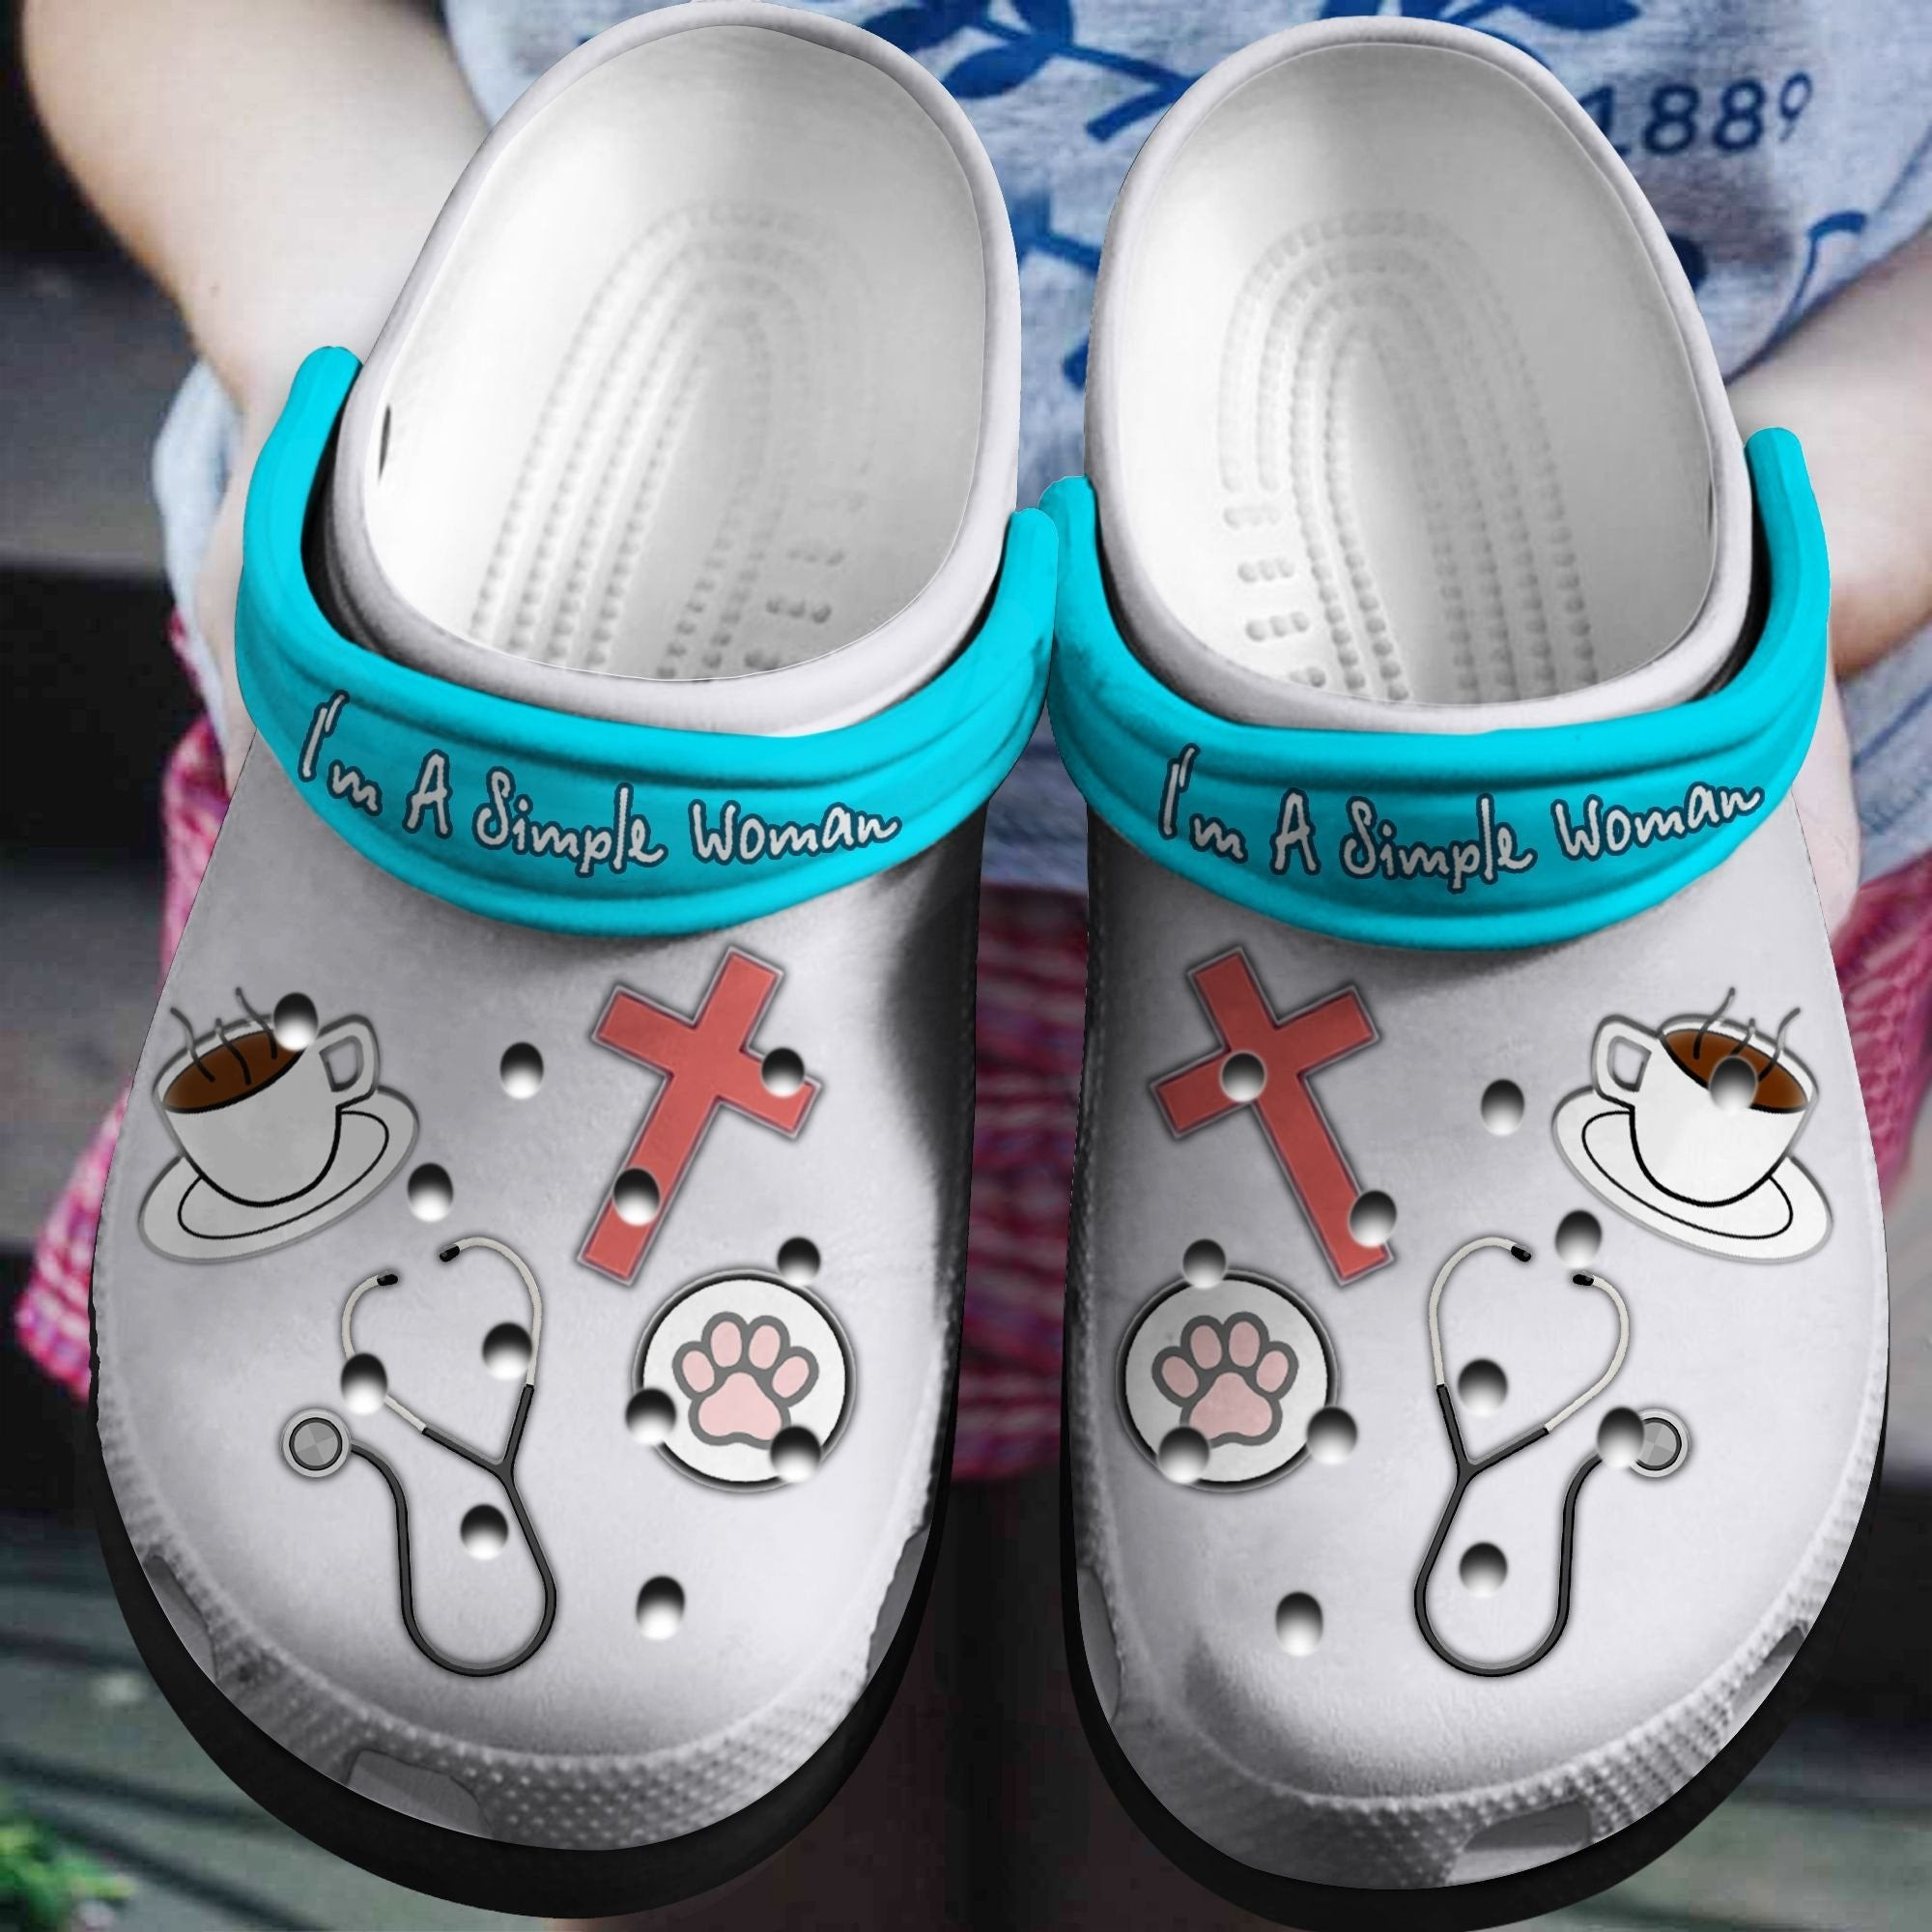 Im A Simple Woman Shoes - Nurse Life With Cute Cat Crocs Clogs Gift